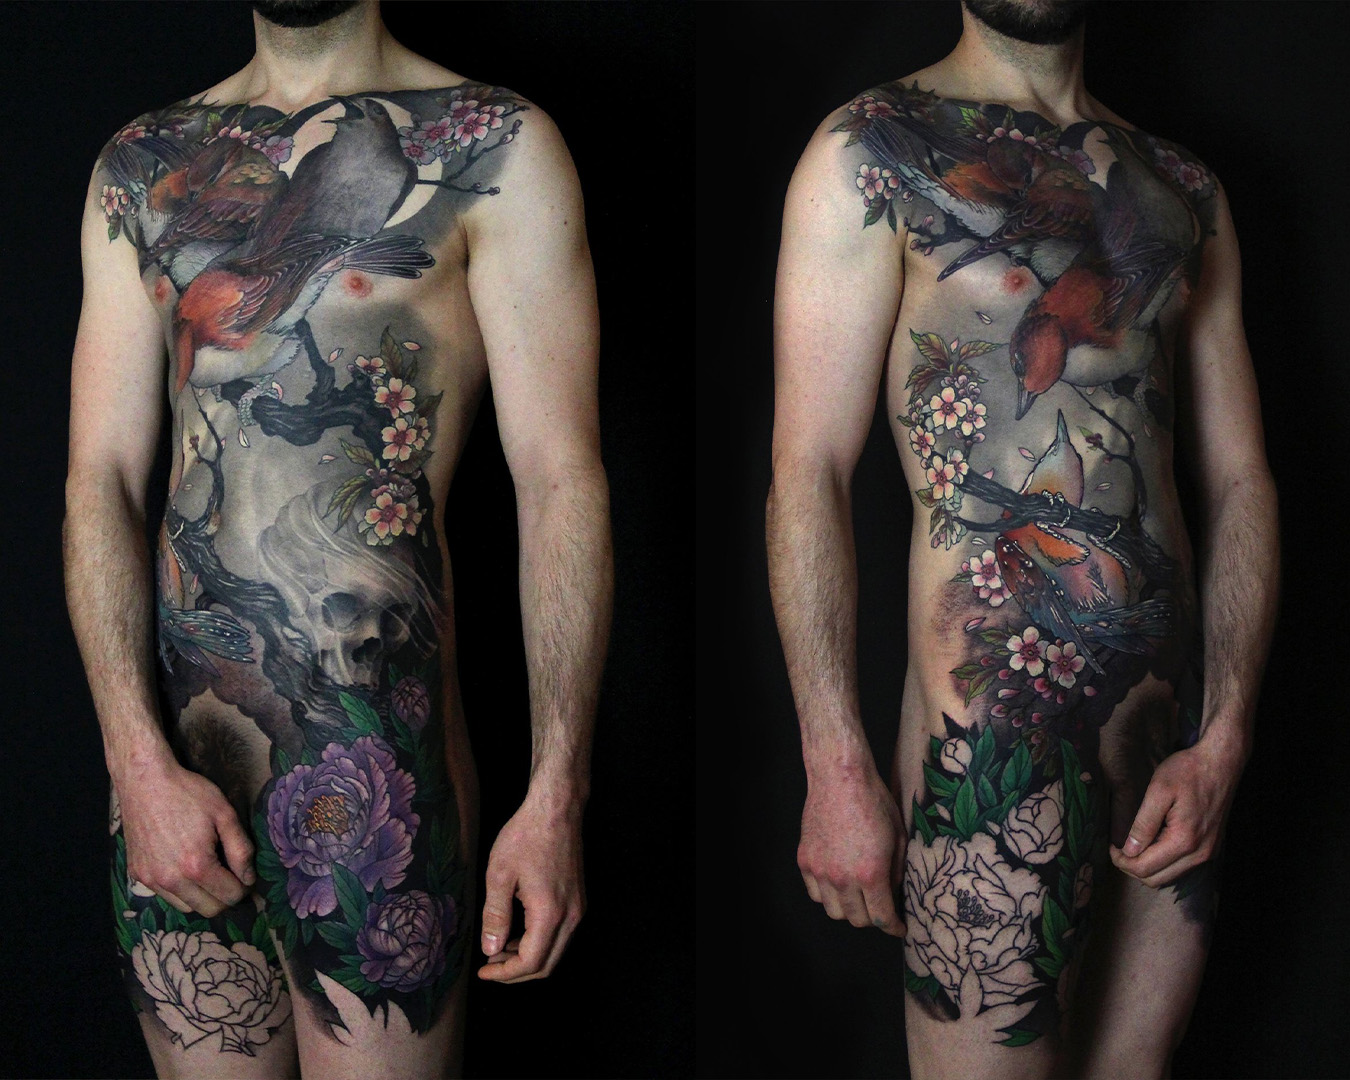 Jeff gogue Body suit tattoo, birds and branches